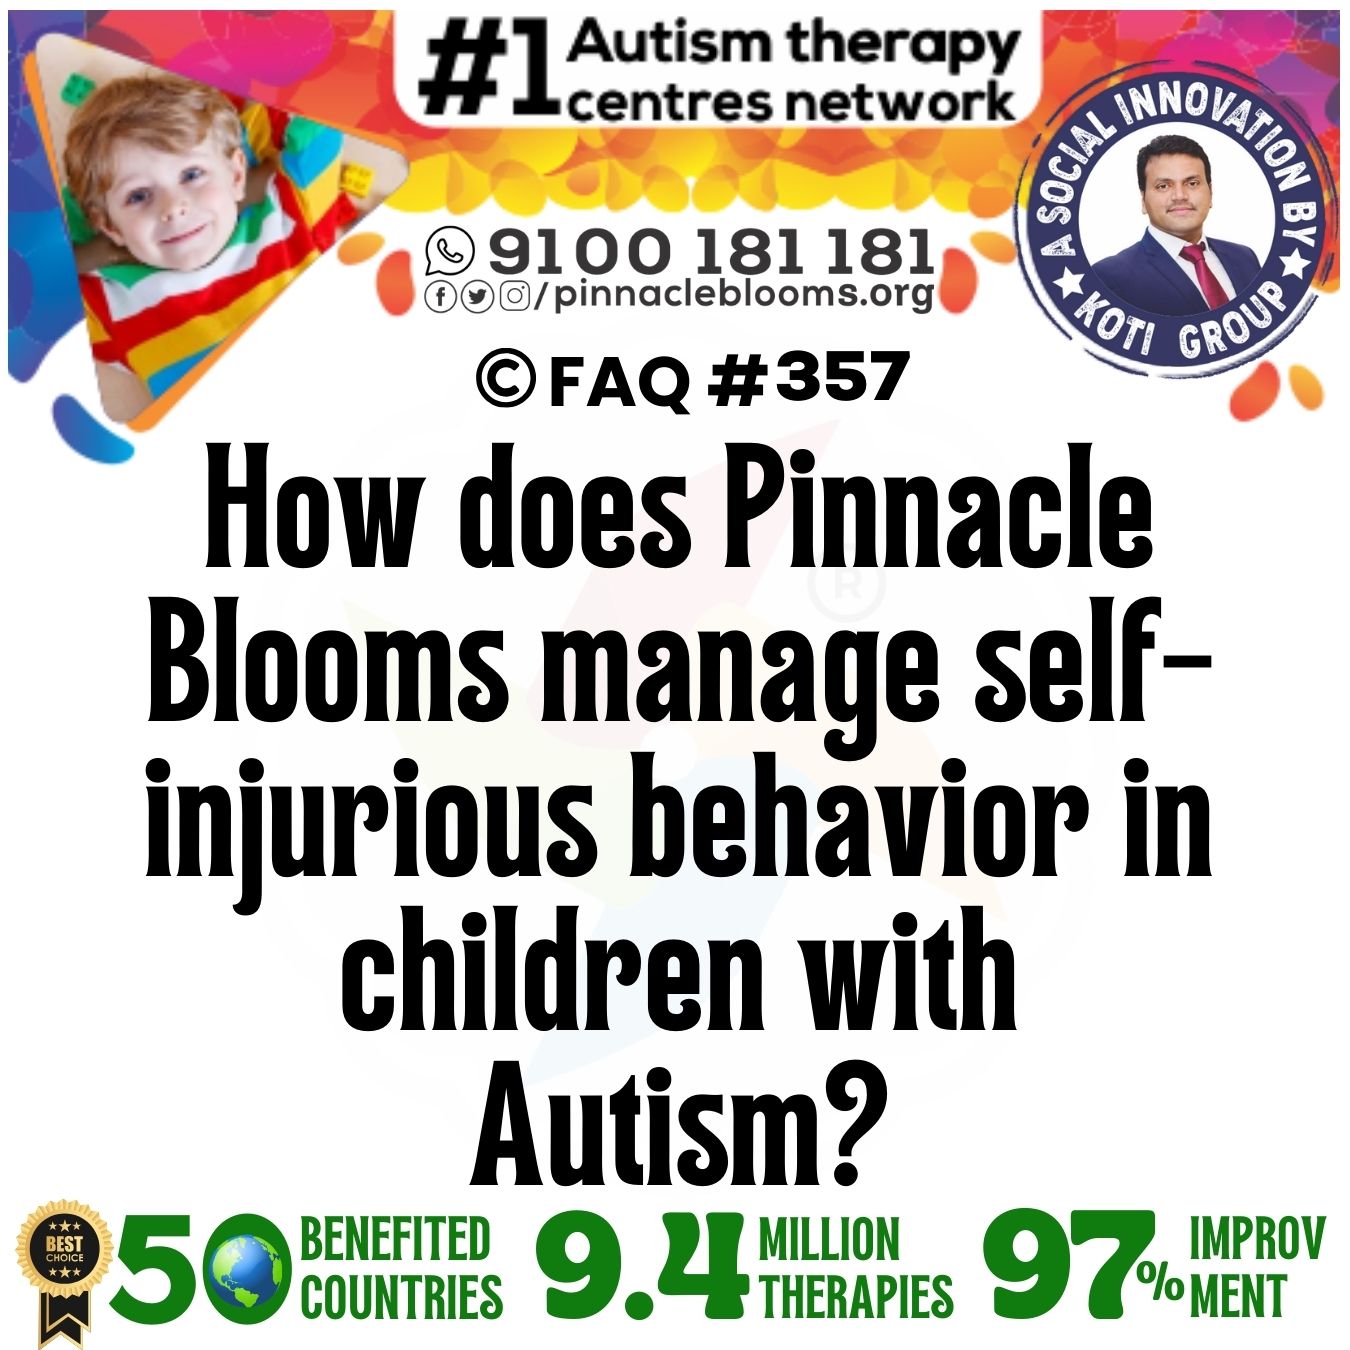 How does Pinnacle Blooms manage self-injurious behavior in children with Autism?